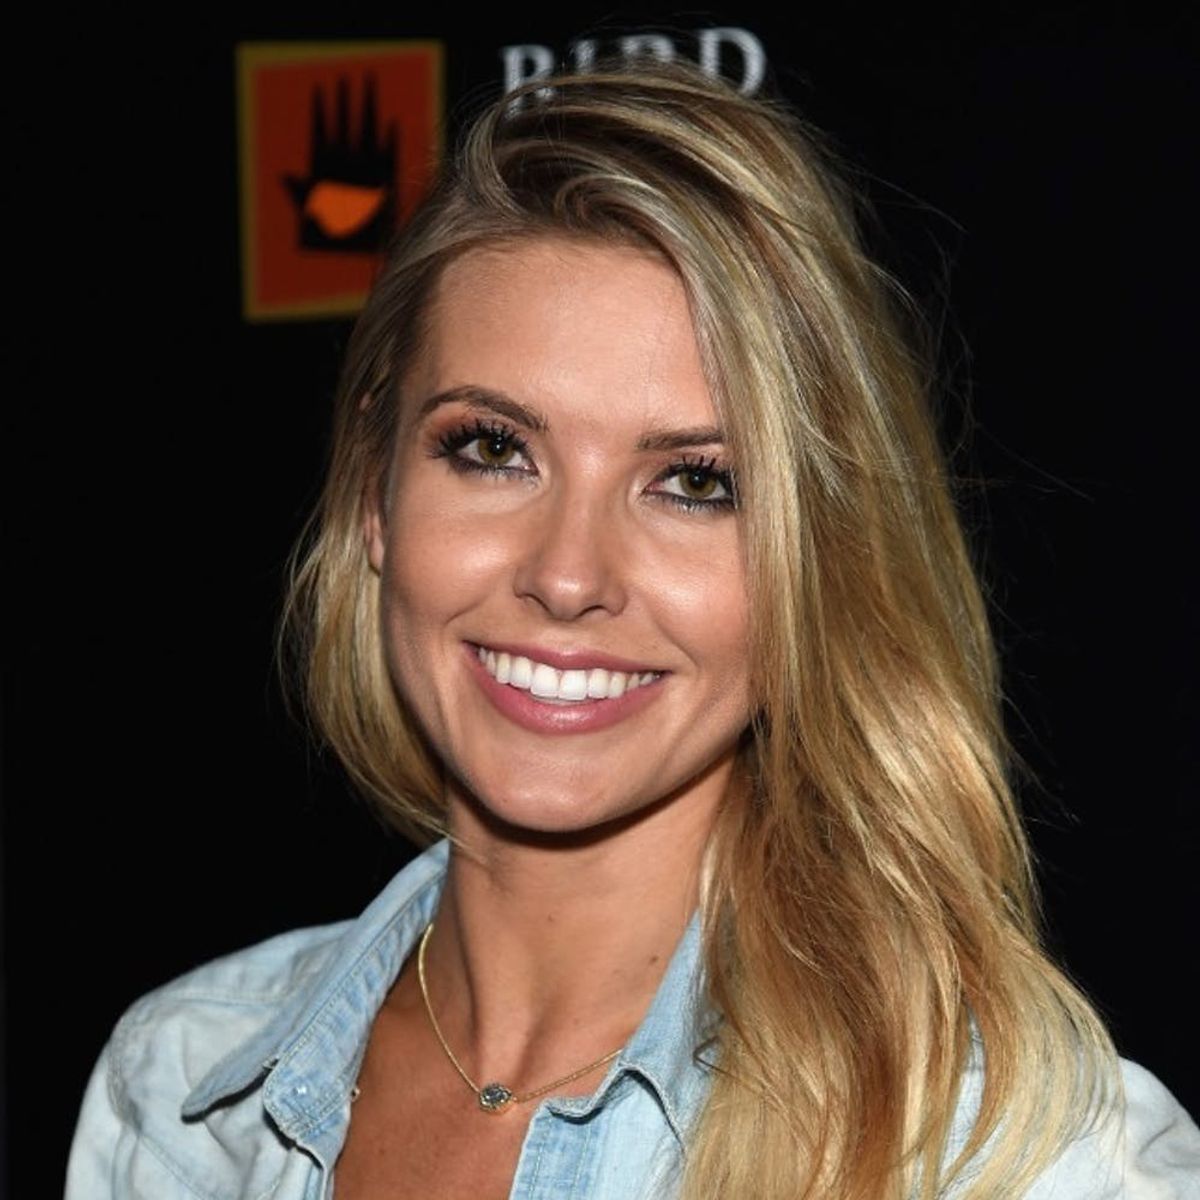 Exclusive: Audrina Patridge Shares Maternity Style + Beauty Tips With Us